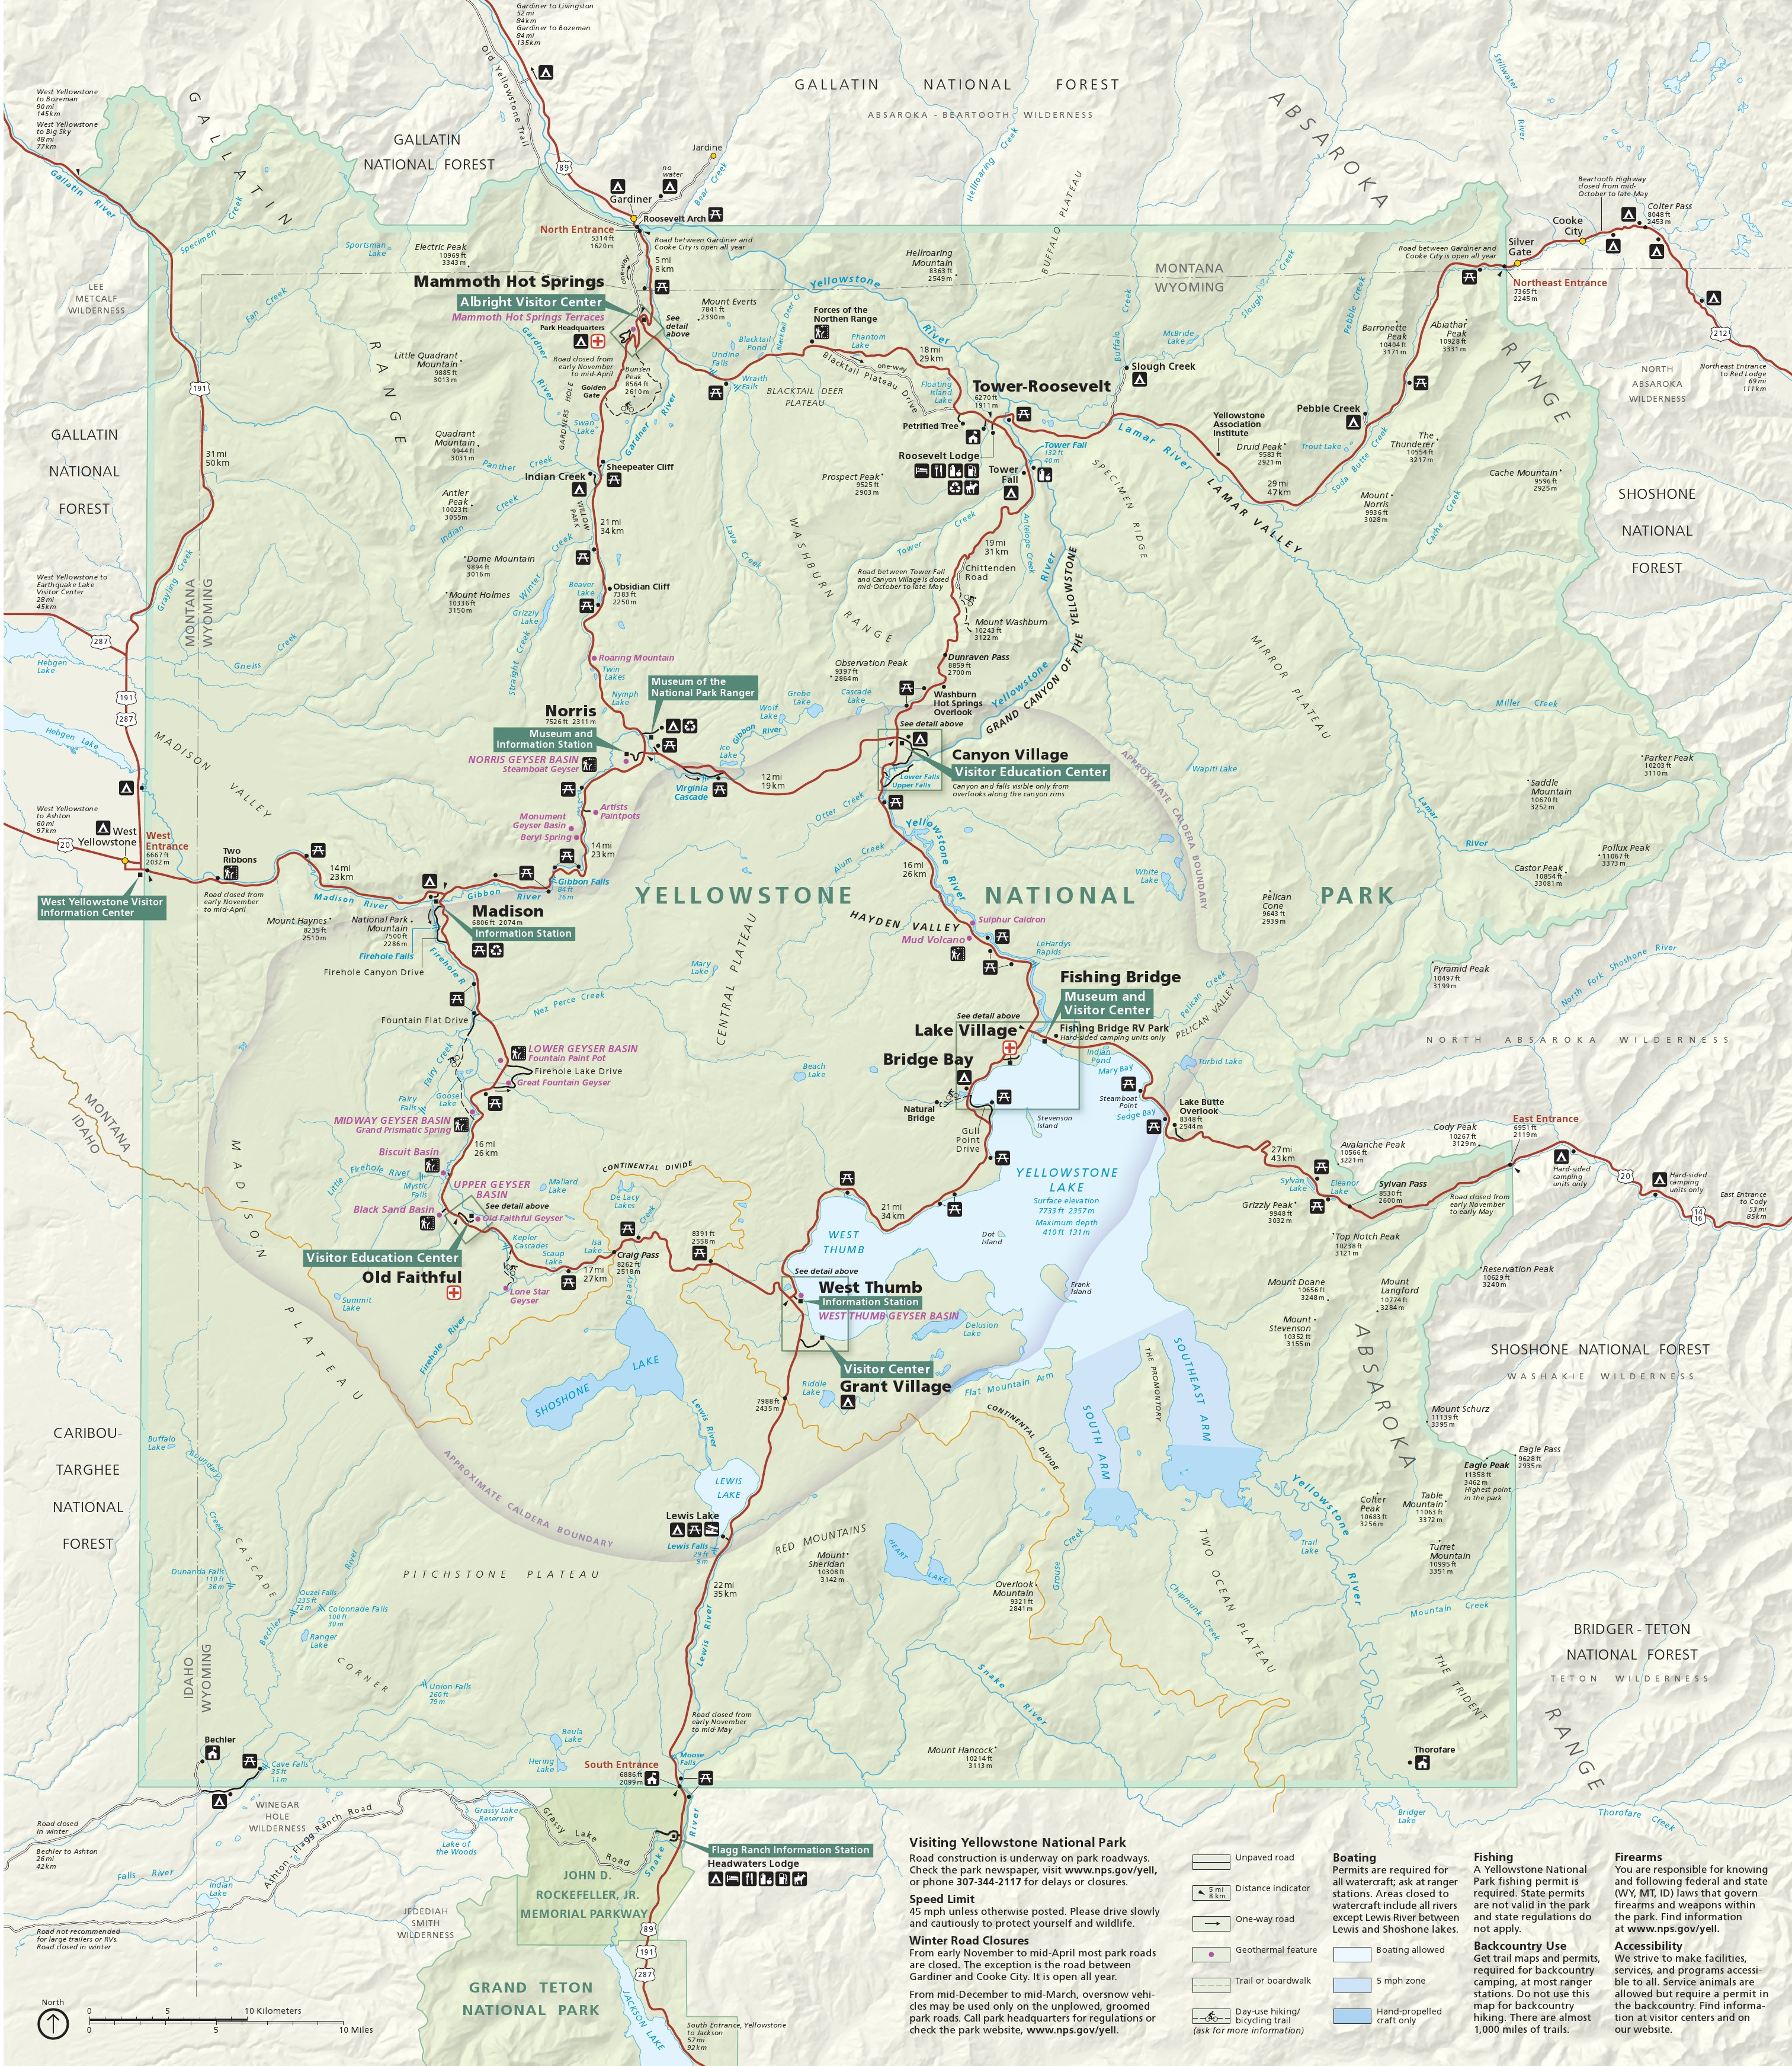 Yellowstone Maps | Npmaps - Just Free Maps, Period. - Printable Map Of Yellowstone National Park